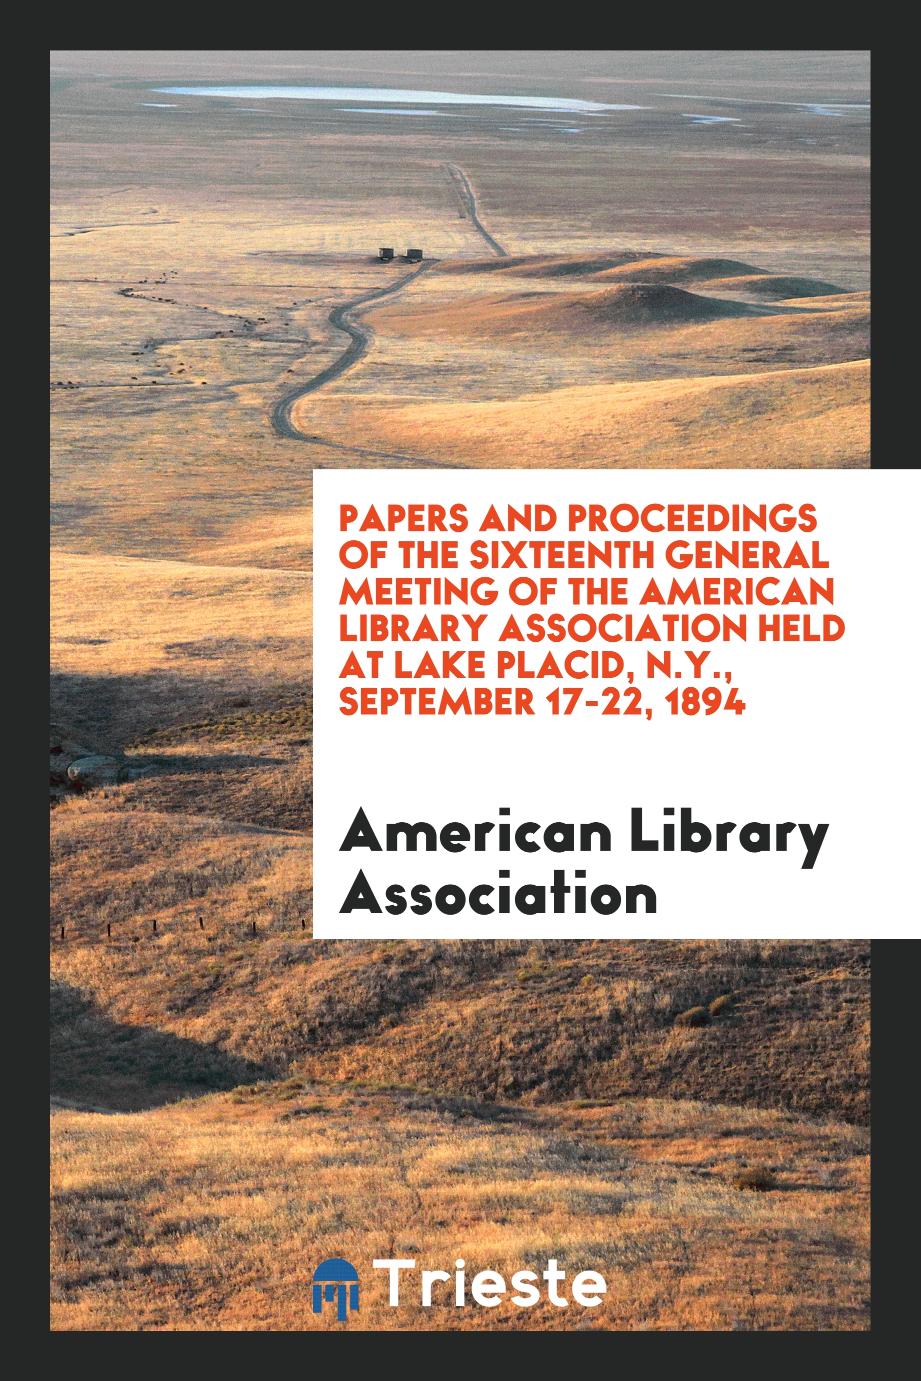 Papers and Proceedings of the sixteenth General Meeting of the American Library Association held at Lake Placid, N.Y., September 17-22, 1894